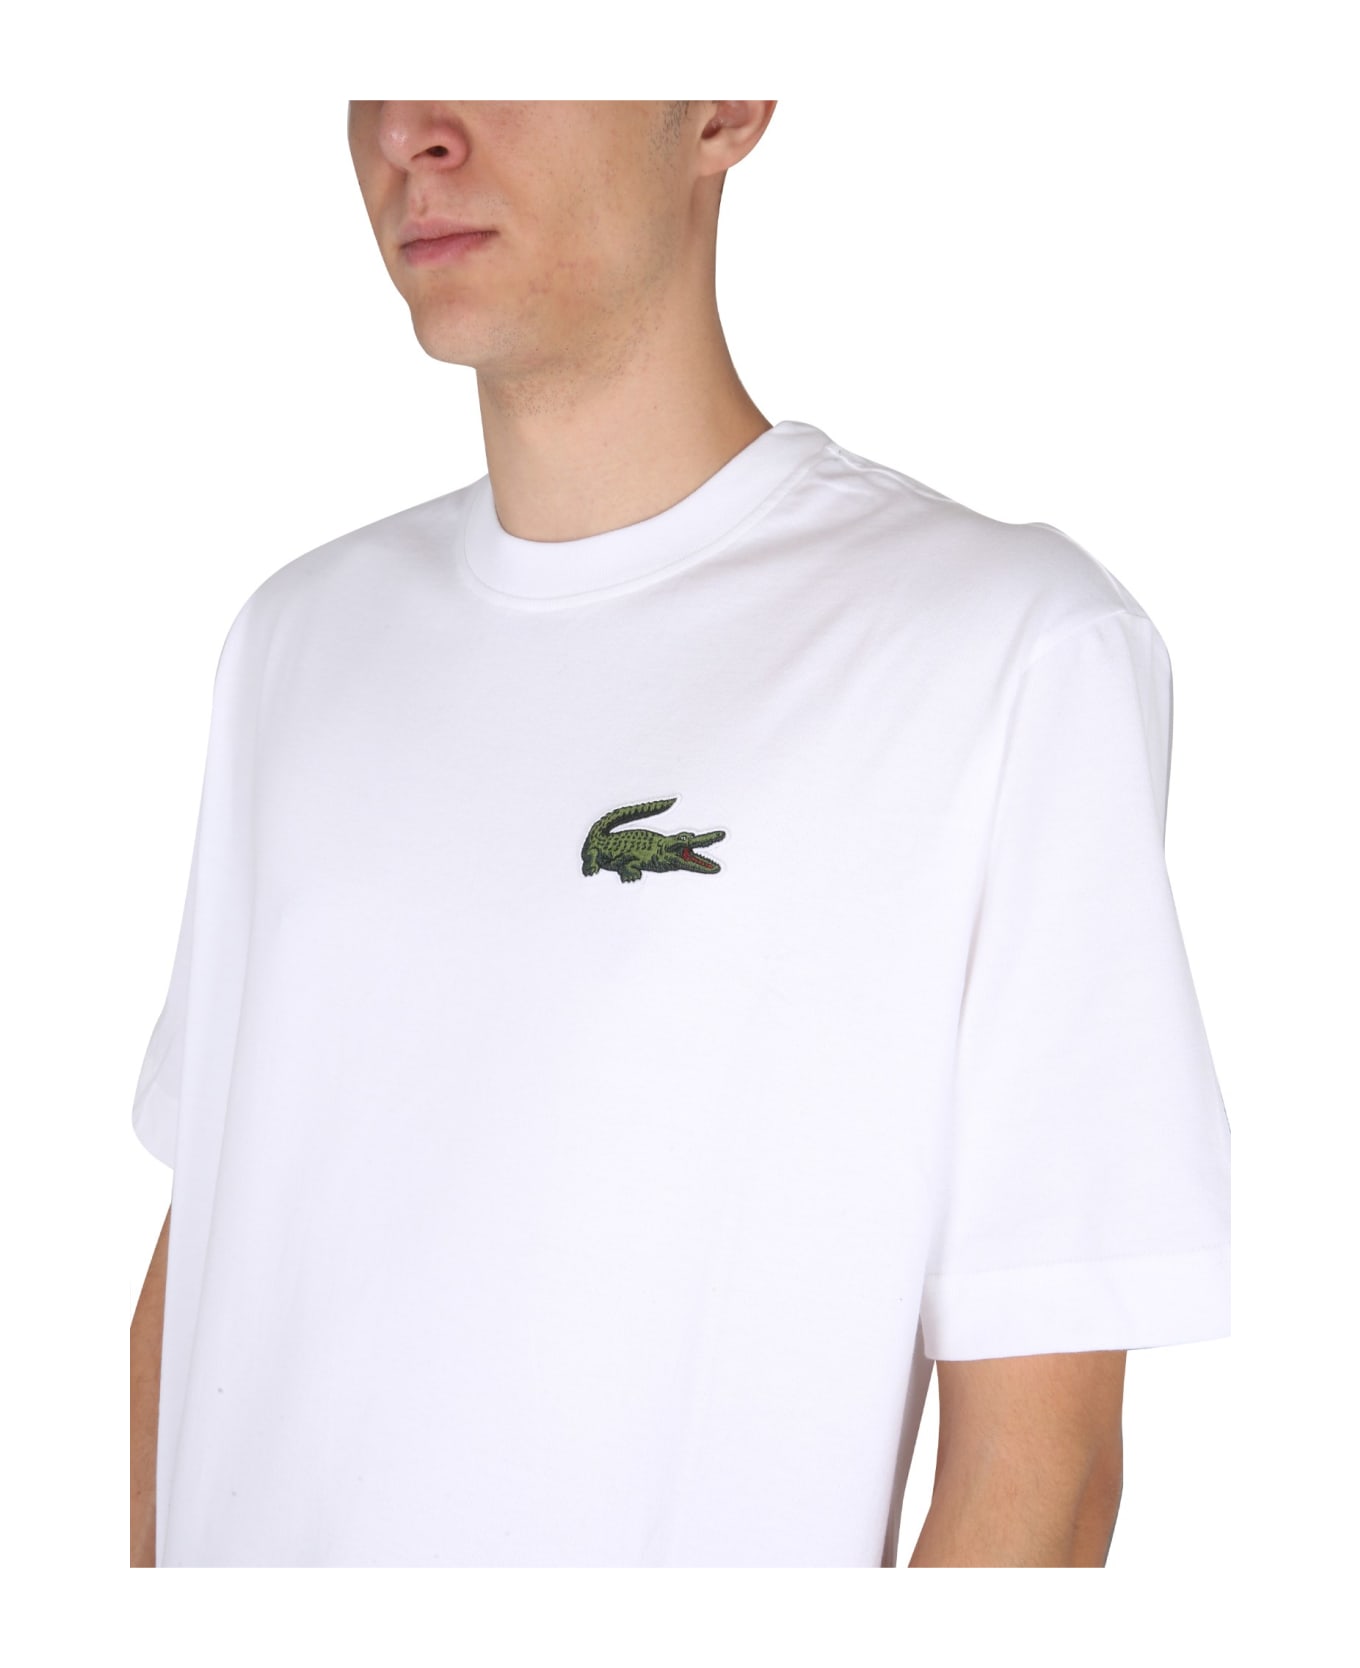 Lacoste T-shirt With Logo Lacoste